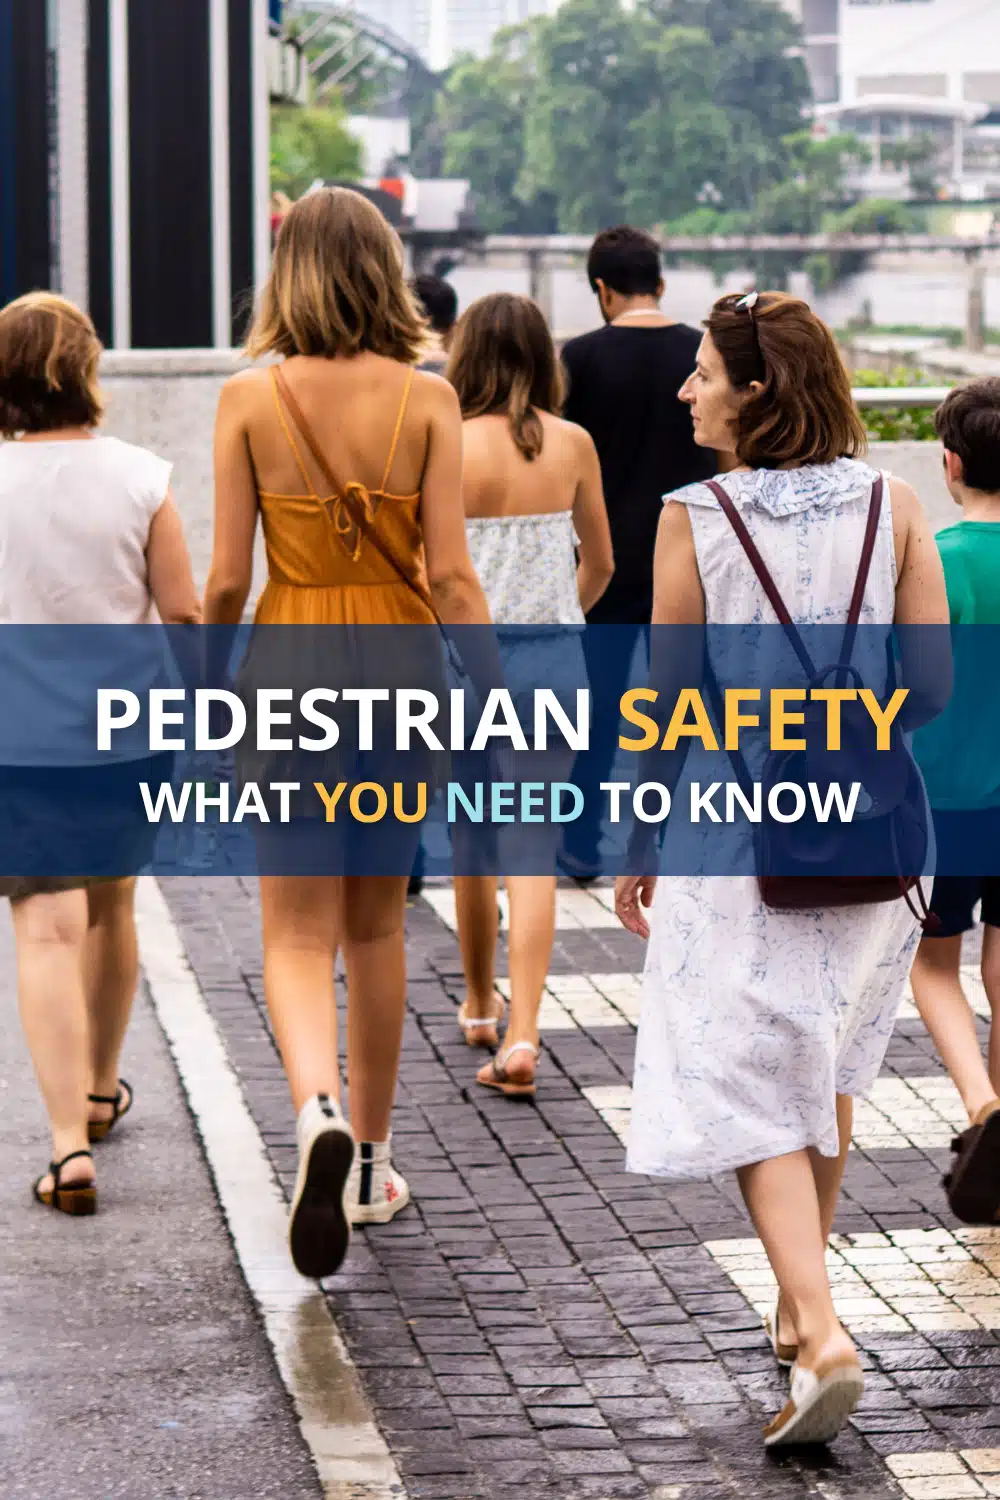 Pedestrian Safety: What You Need To Know